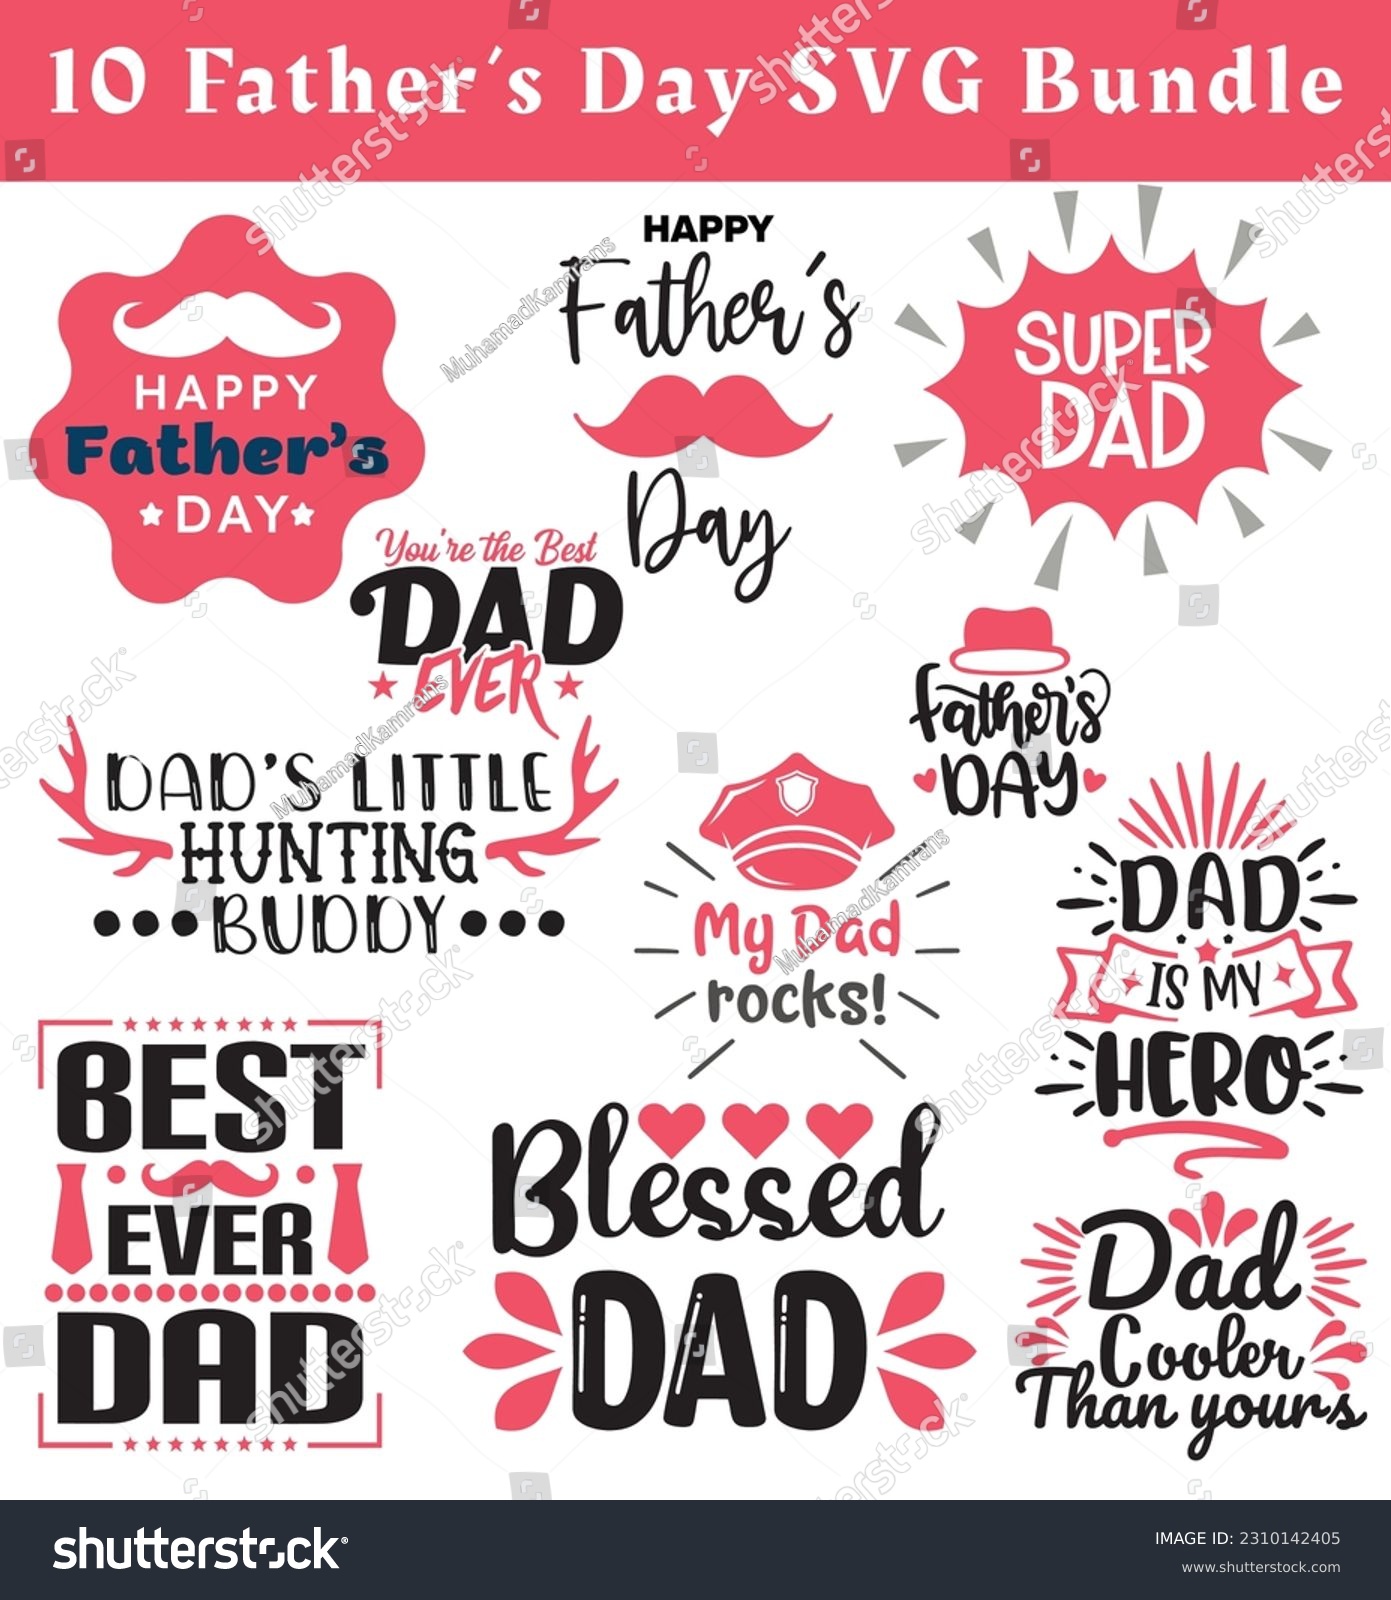 SVG of 10 Father's Day SVG Bundle, Blessed Father, Thank You Dad SVG, World Best Dad, Dady is My Hero, Happy Father's Day, Best Dad Ever SVG, Super Dad, Printable SVG svg